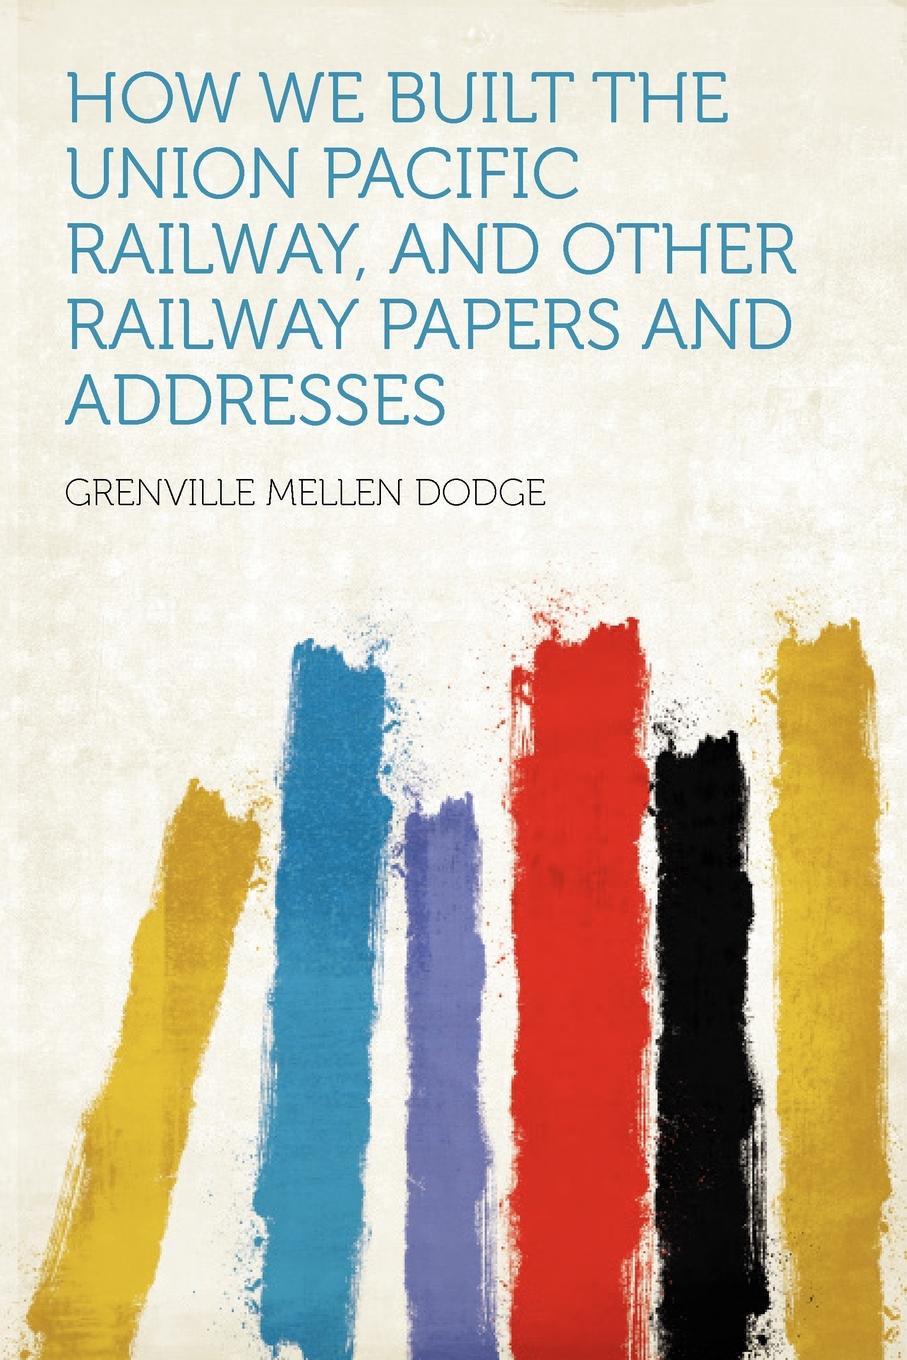 How We Built the Union Pacific Railway, and Other Railway Papers and Addresses